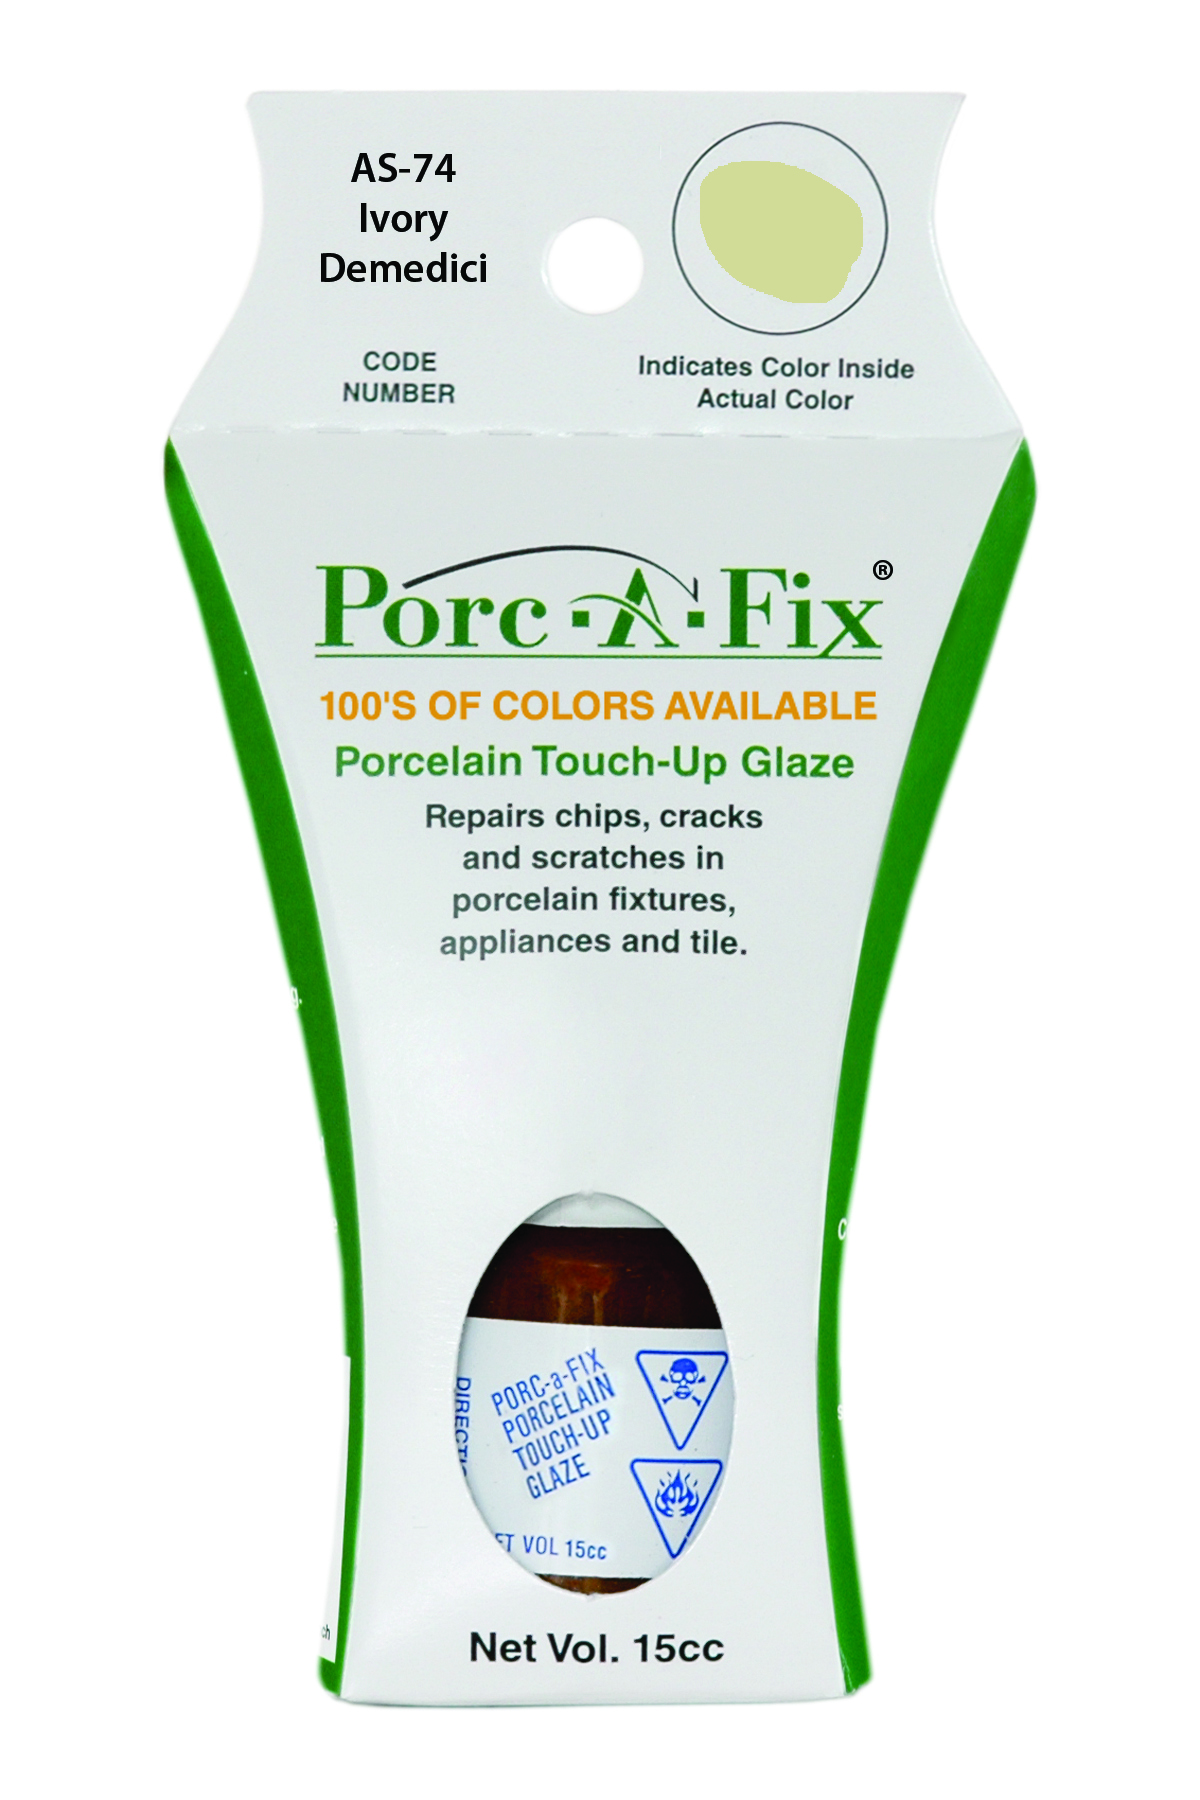 Fixture-Fix | AS-74 | Porc-A-Fix Touch-Up Glaze American Standard Ivory DeMedici - Compatible with American Standard 070900-0370A Touch Up Paint Kit - IVORY DEMEDICI